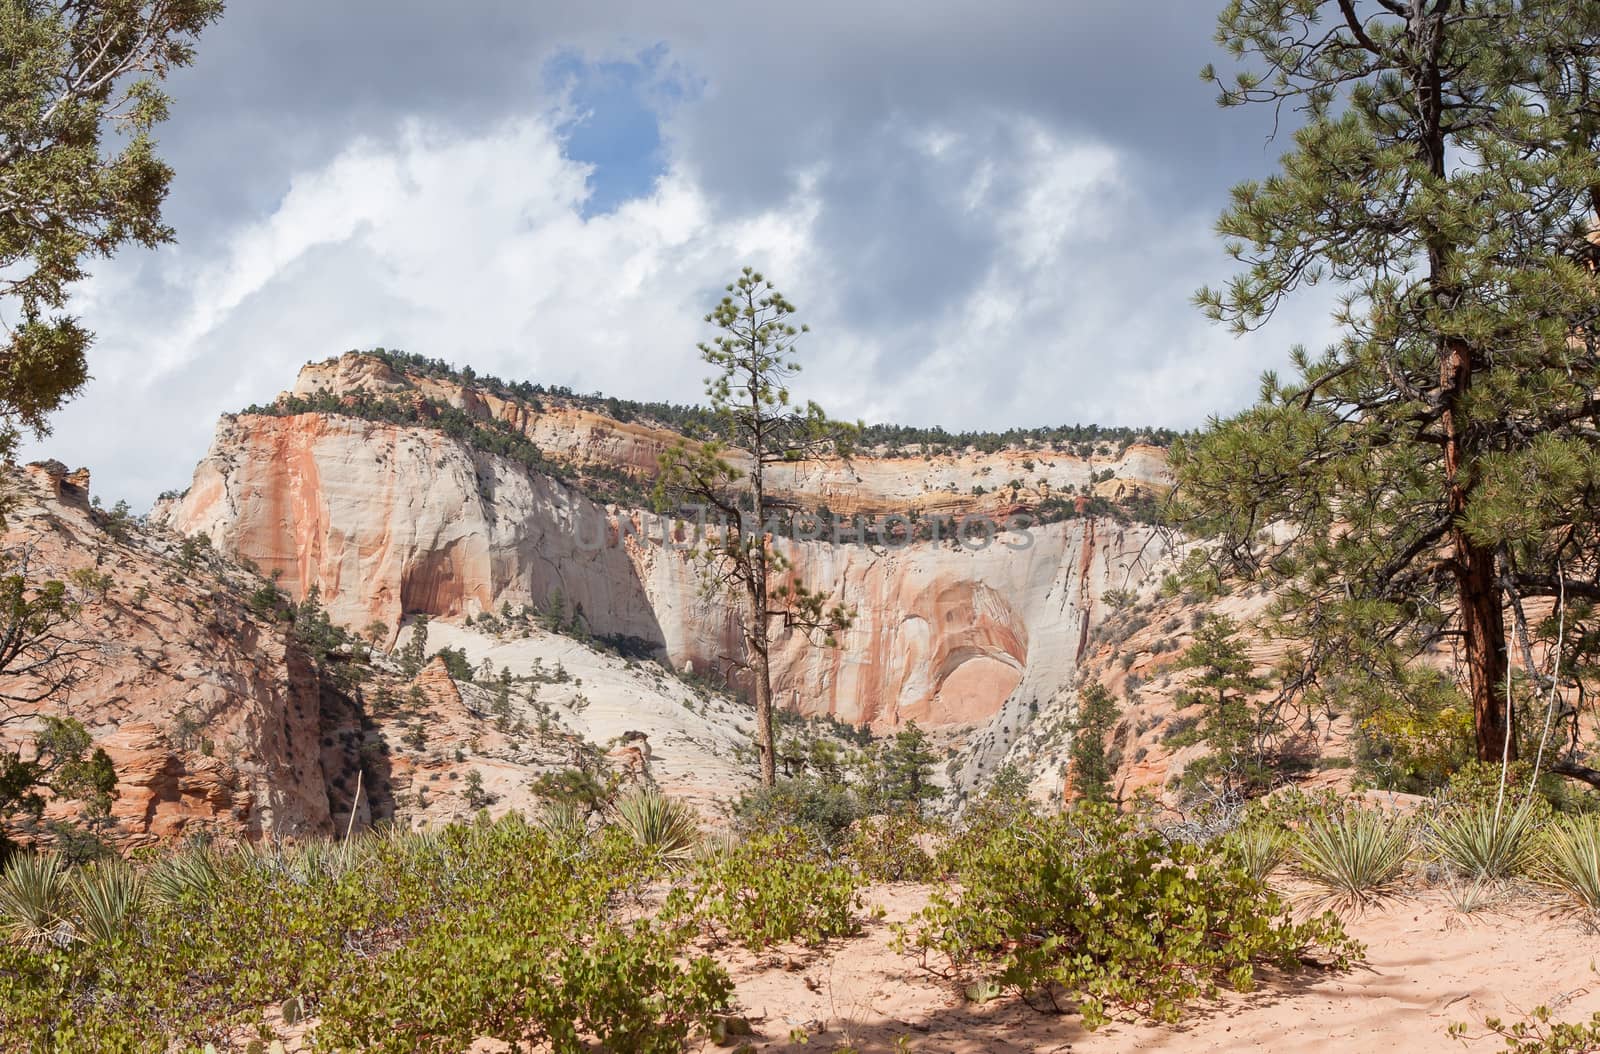 This was taken during the Fall in the upper plateau area of Zion National Park. The colorful sandstone stands brightly against a threatening sky.